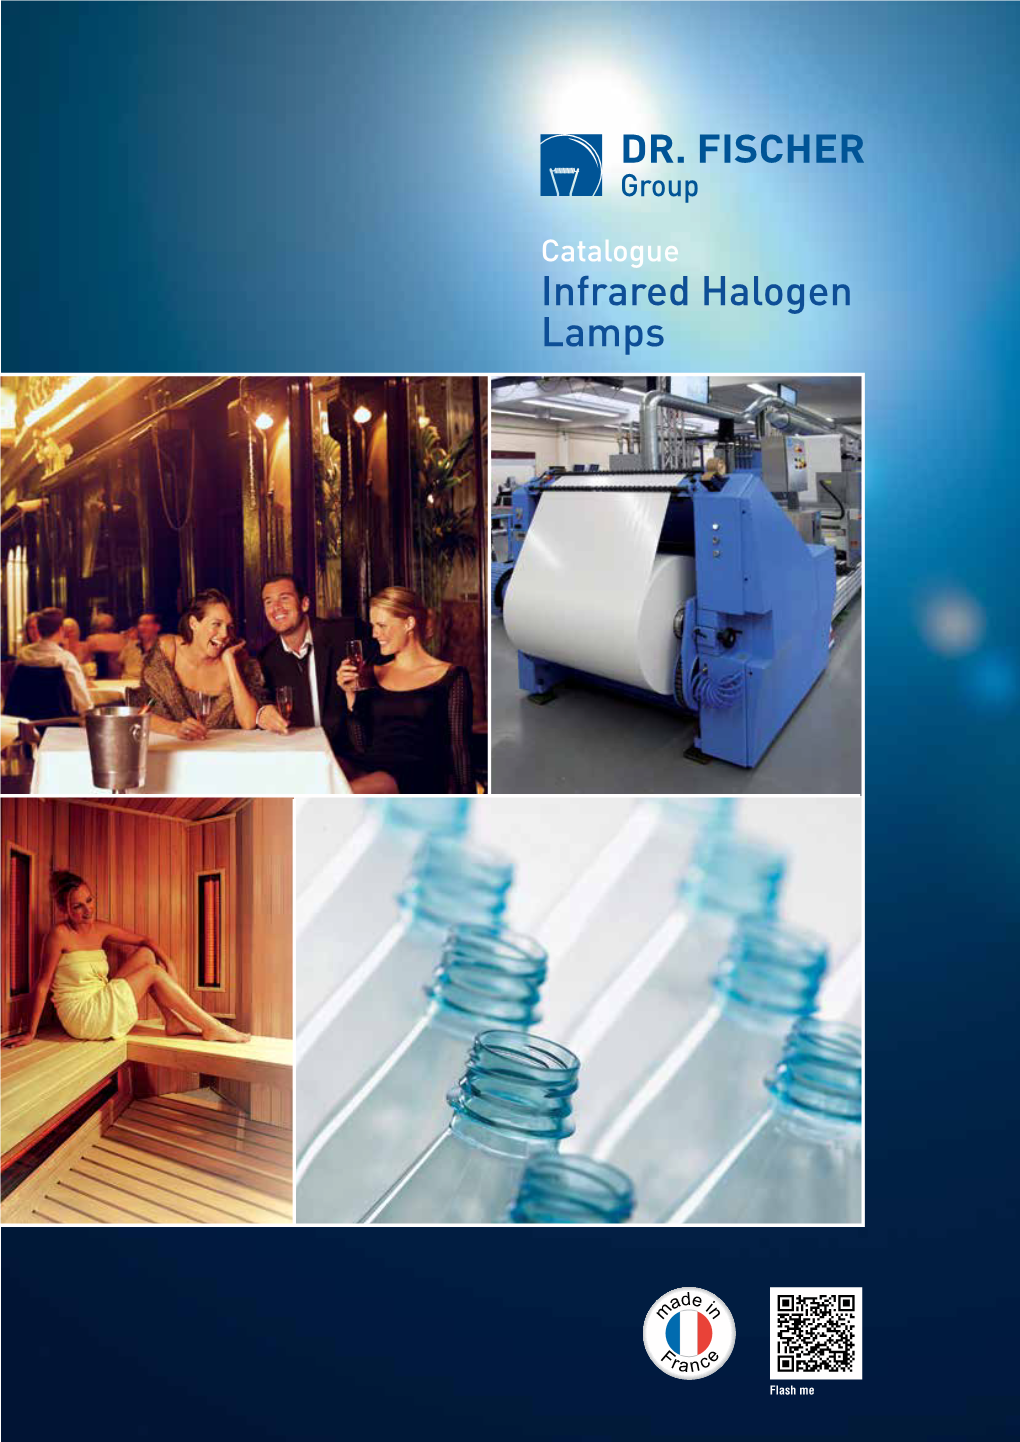 Infrared Halogen Lamps for Industrial Applications